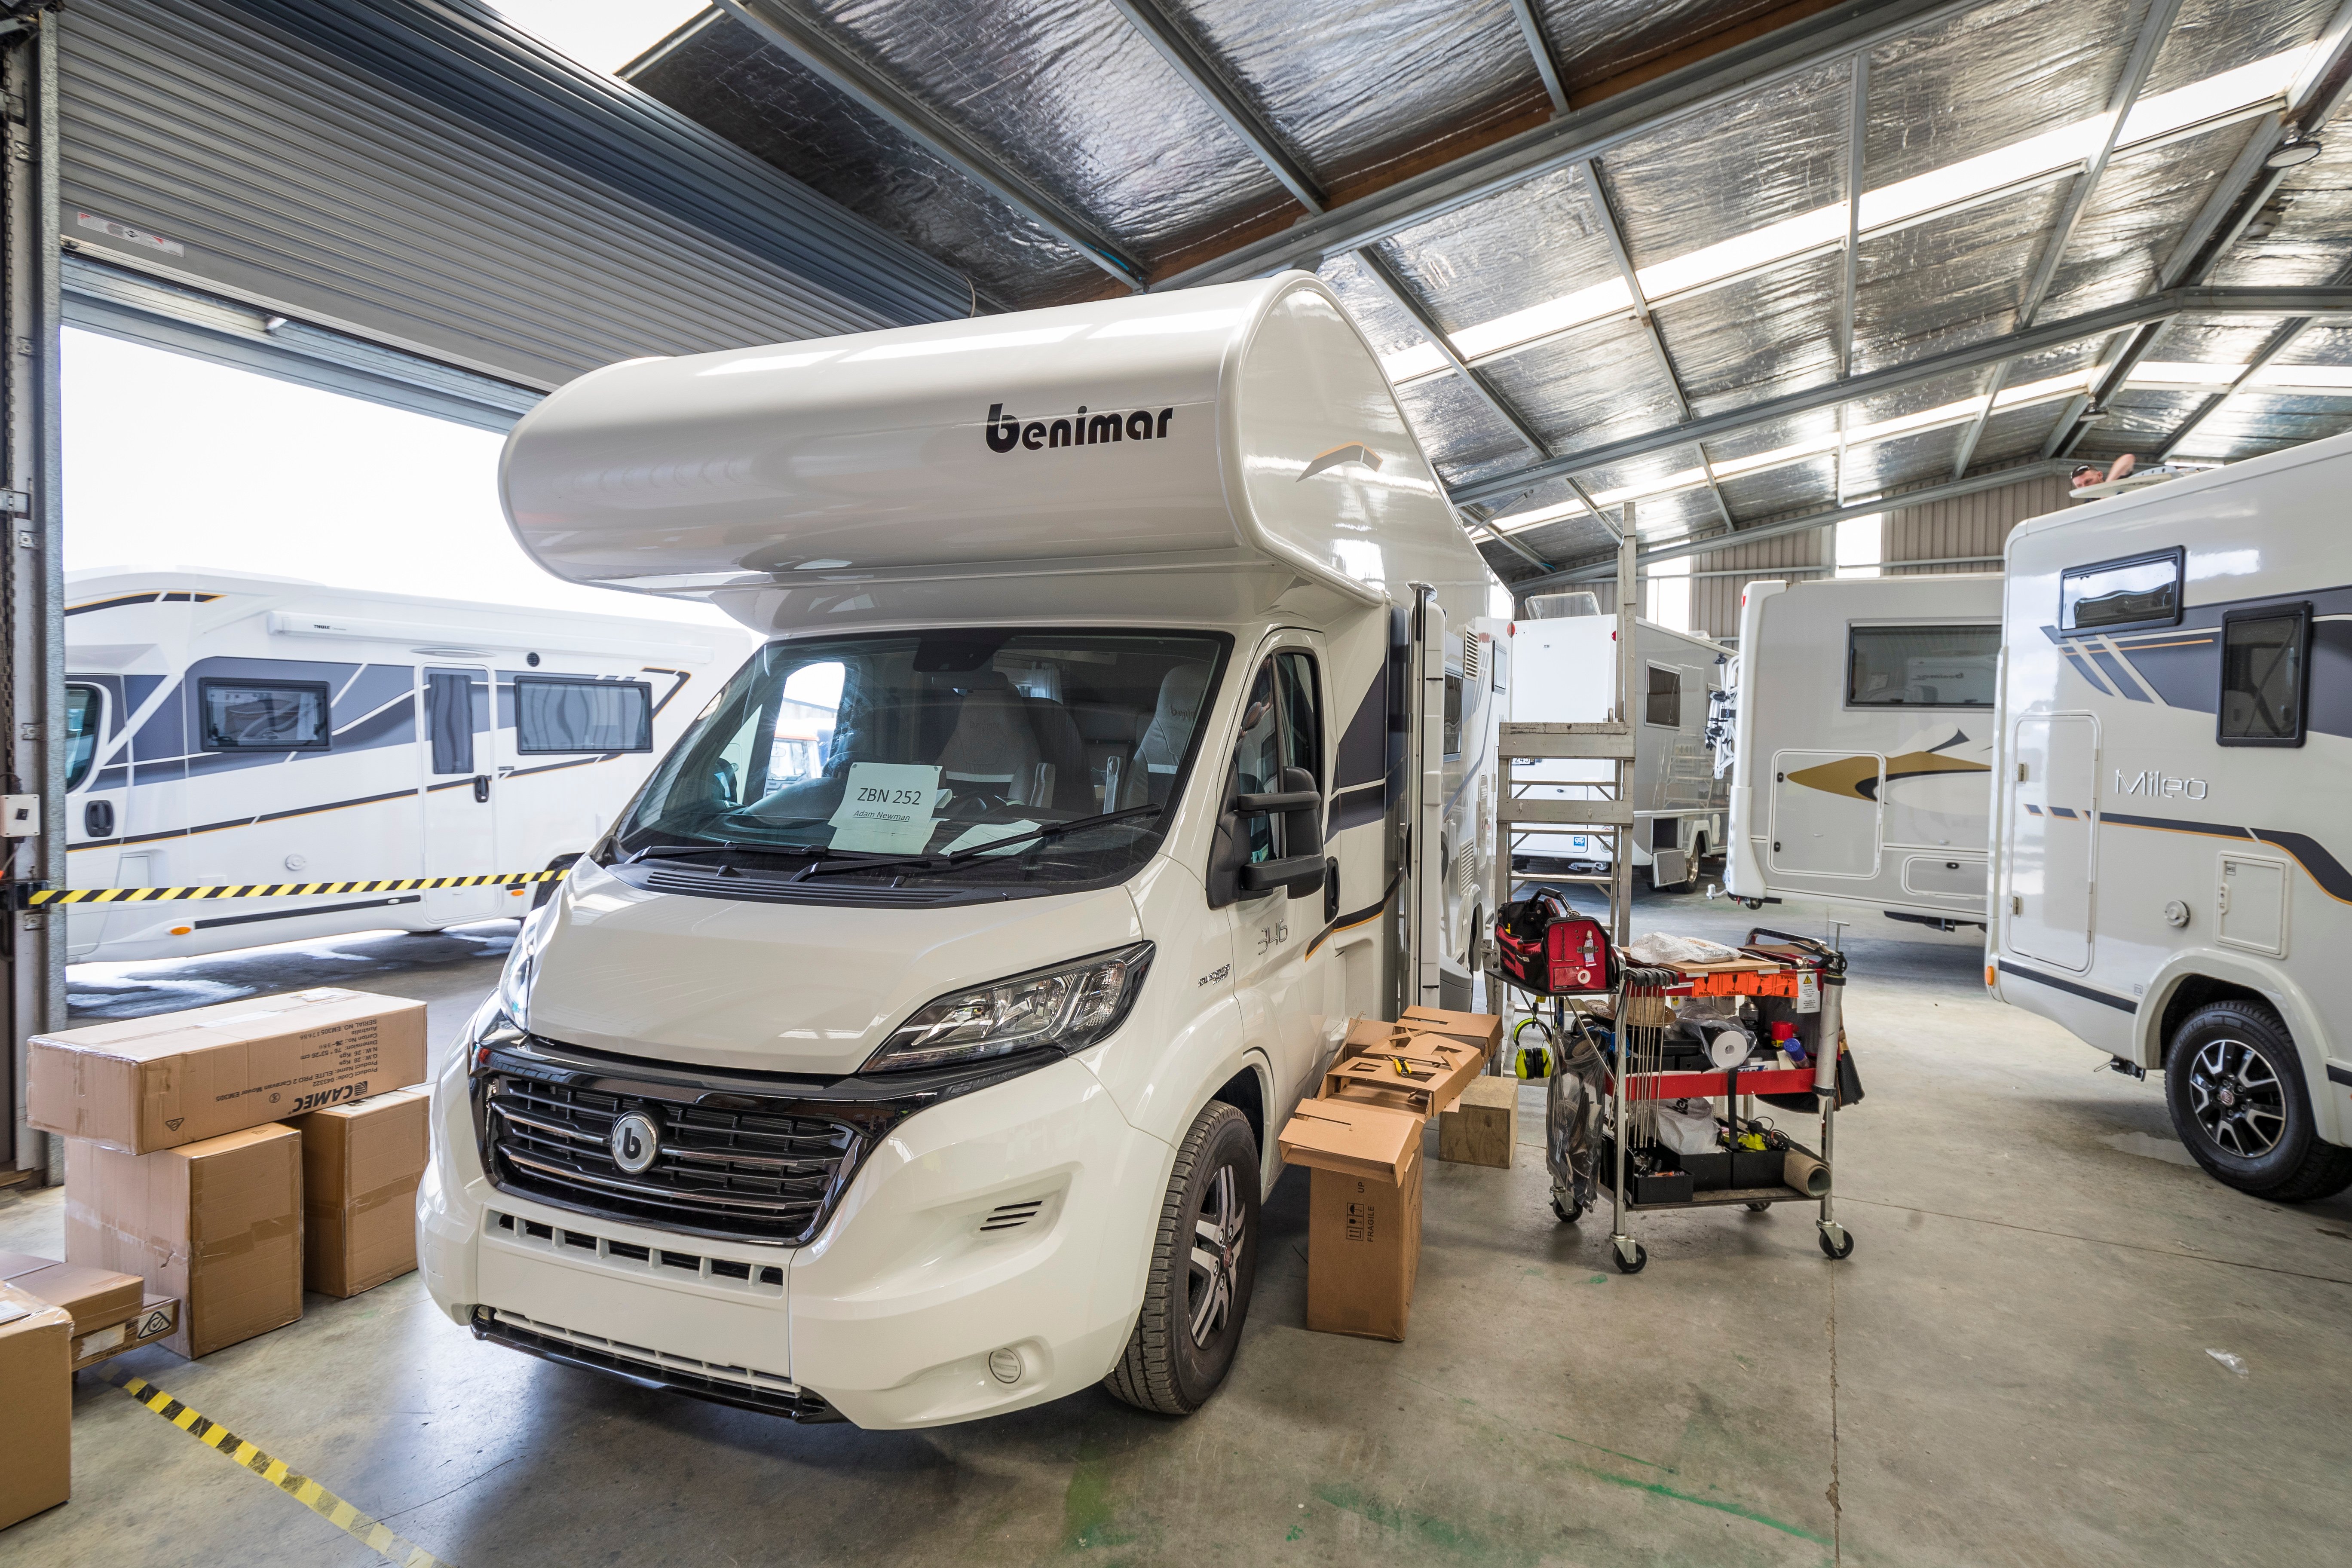 Servicing your motorhomes vehicle how to get it right